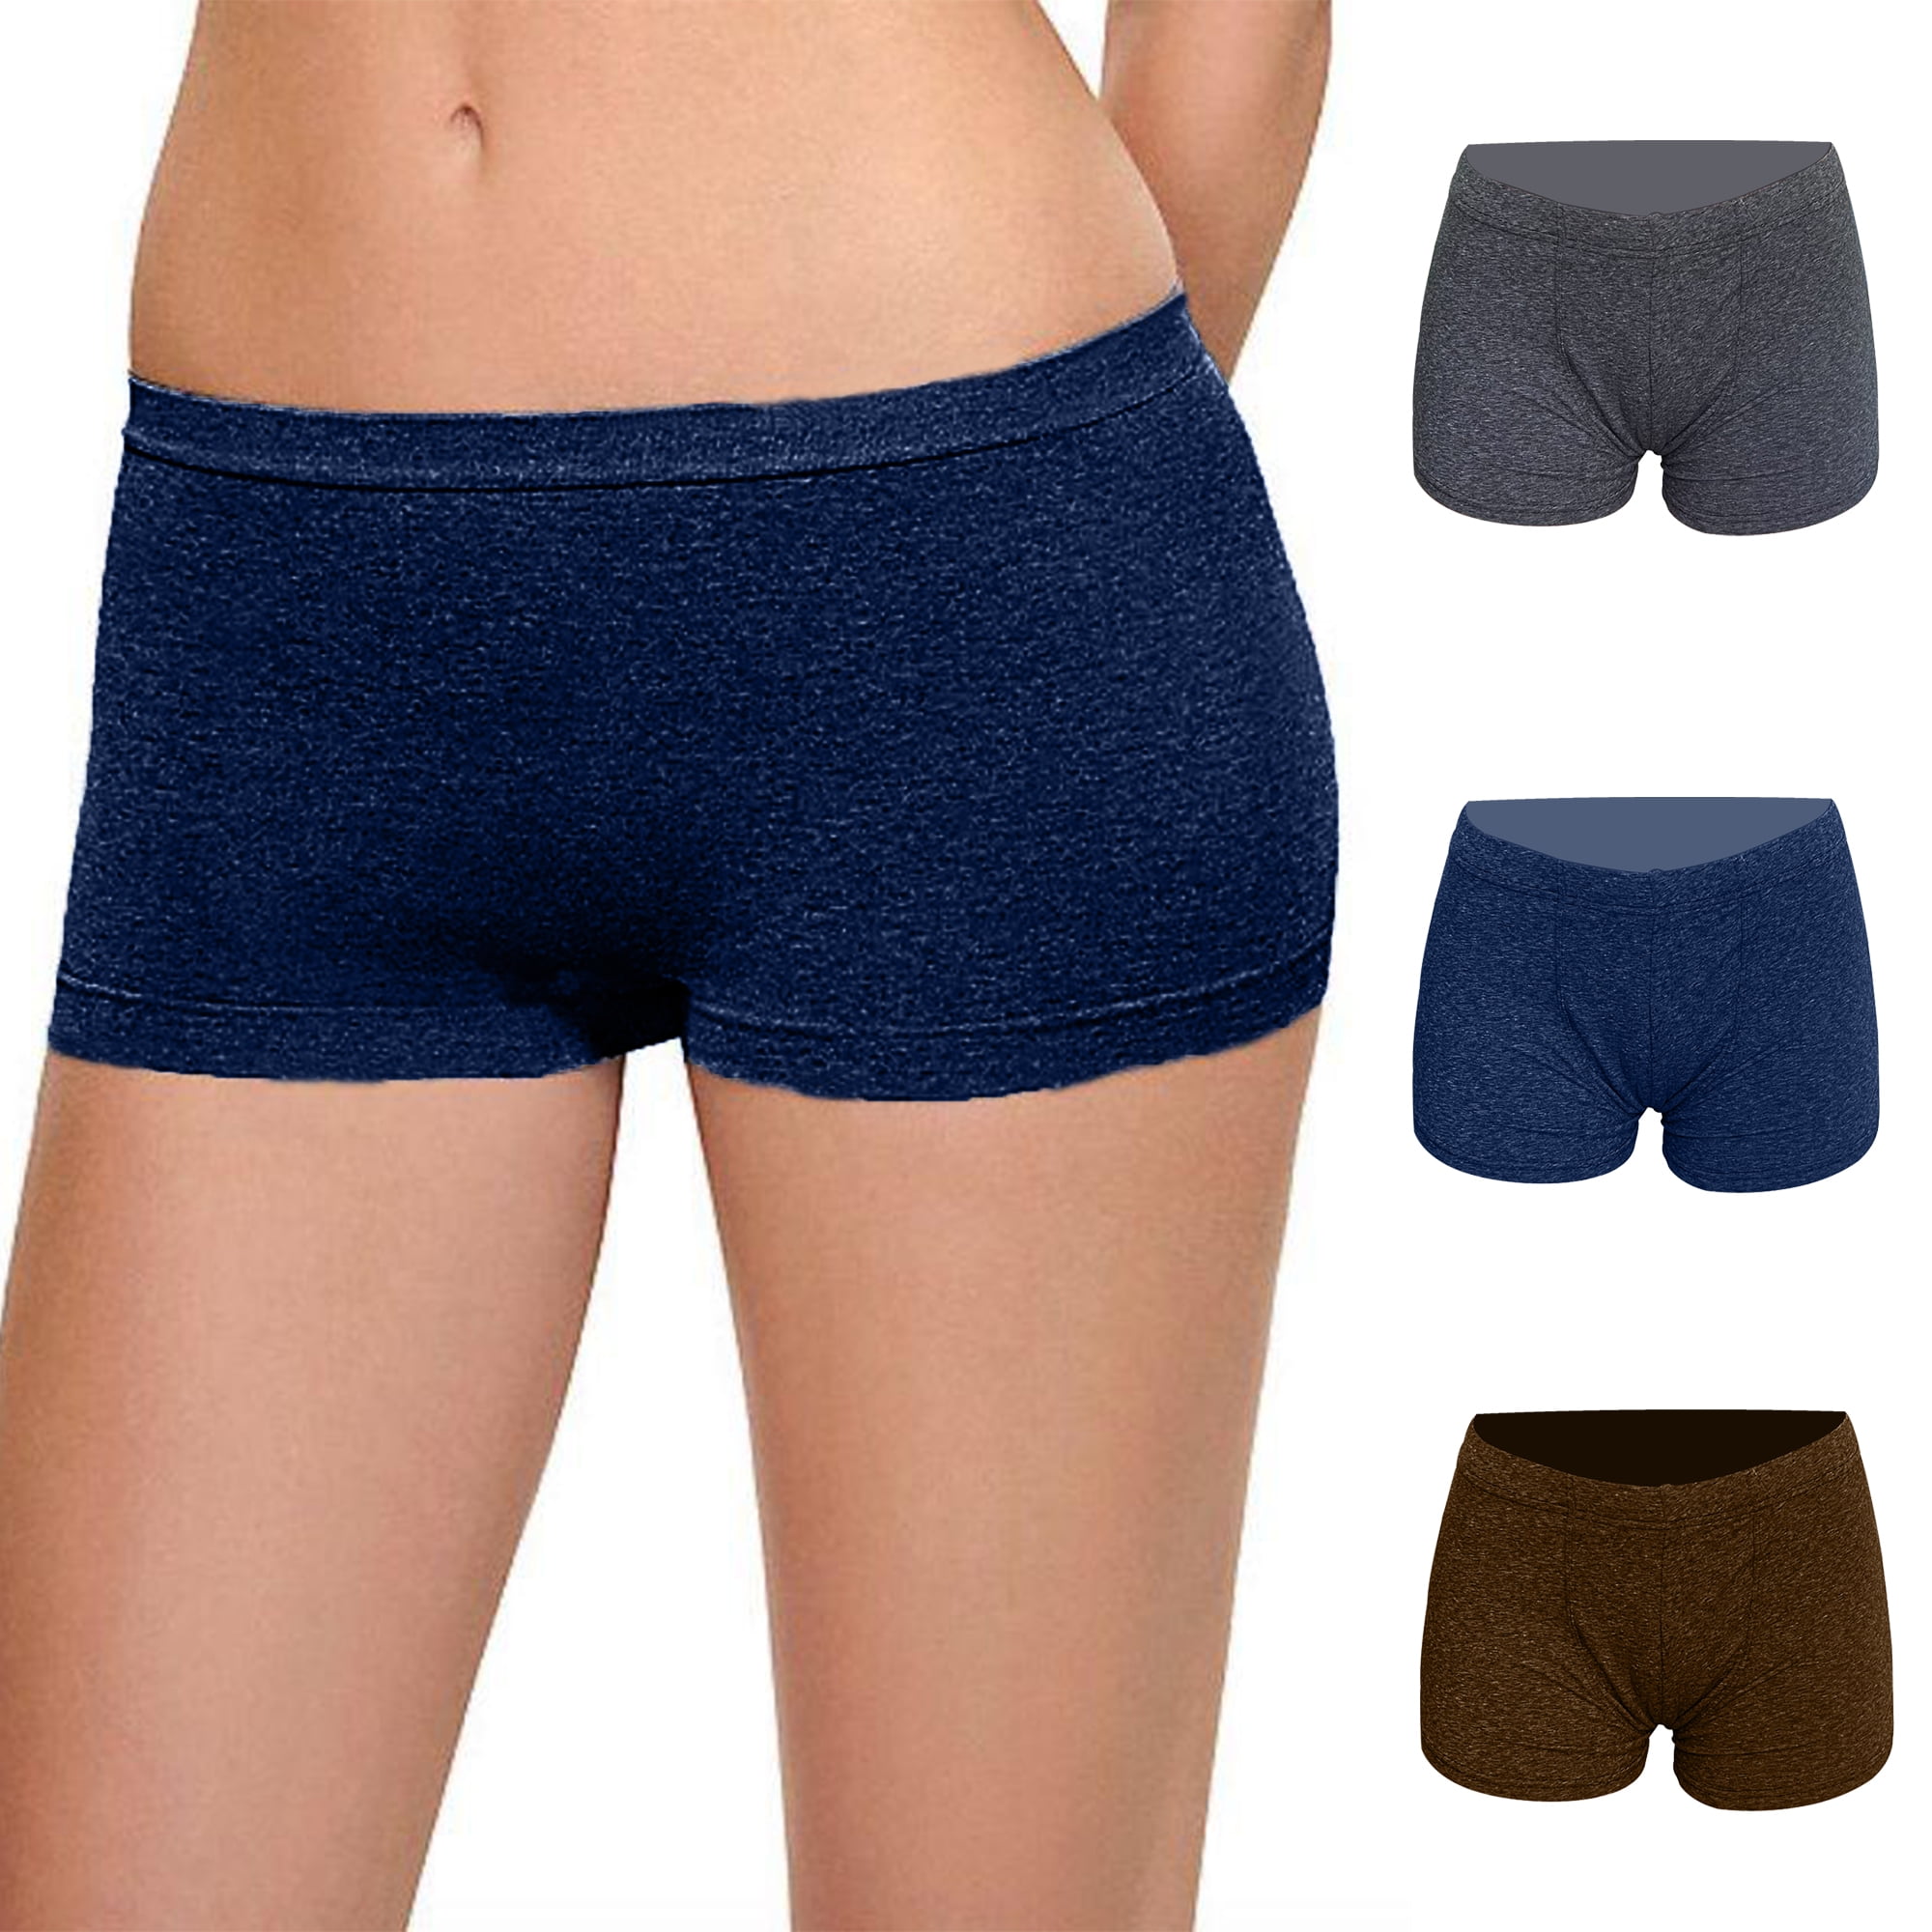 Kindly Yours Women’s Sustainable Cotton Boyshort Underwear, 3-Pack